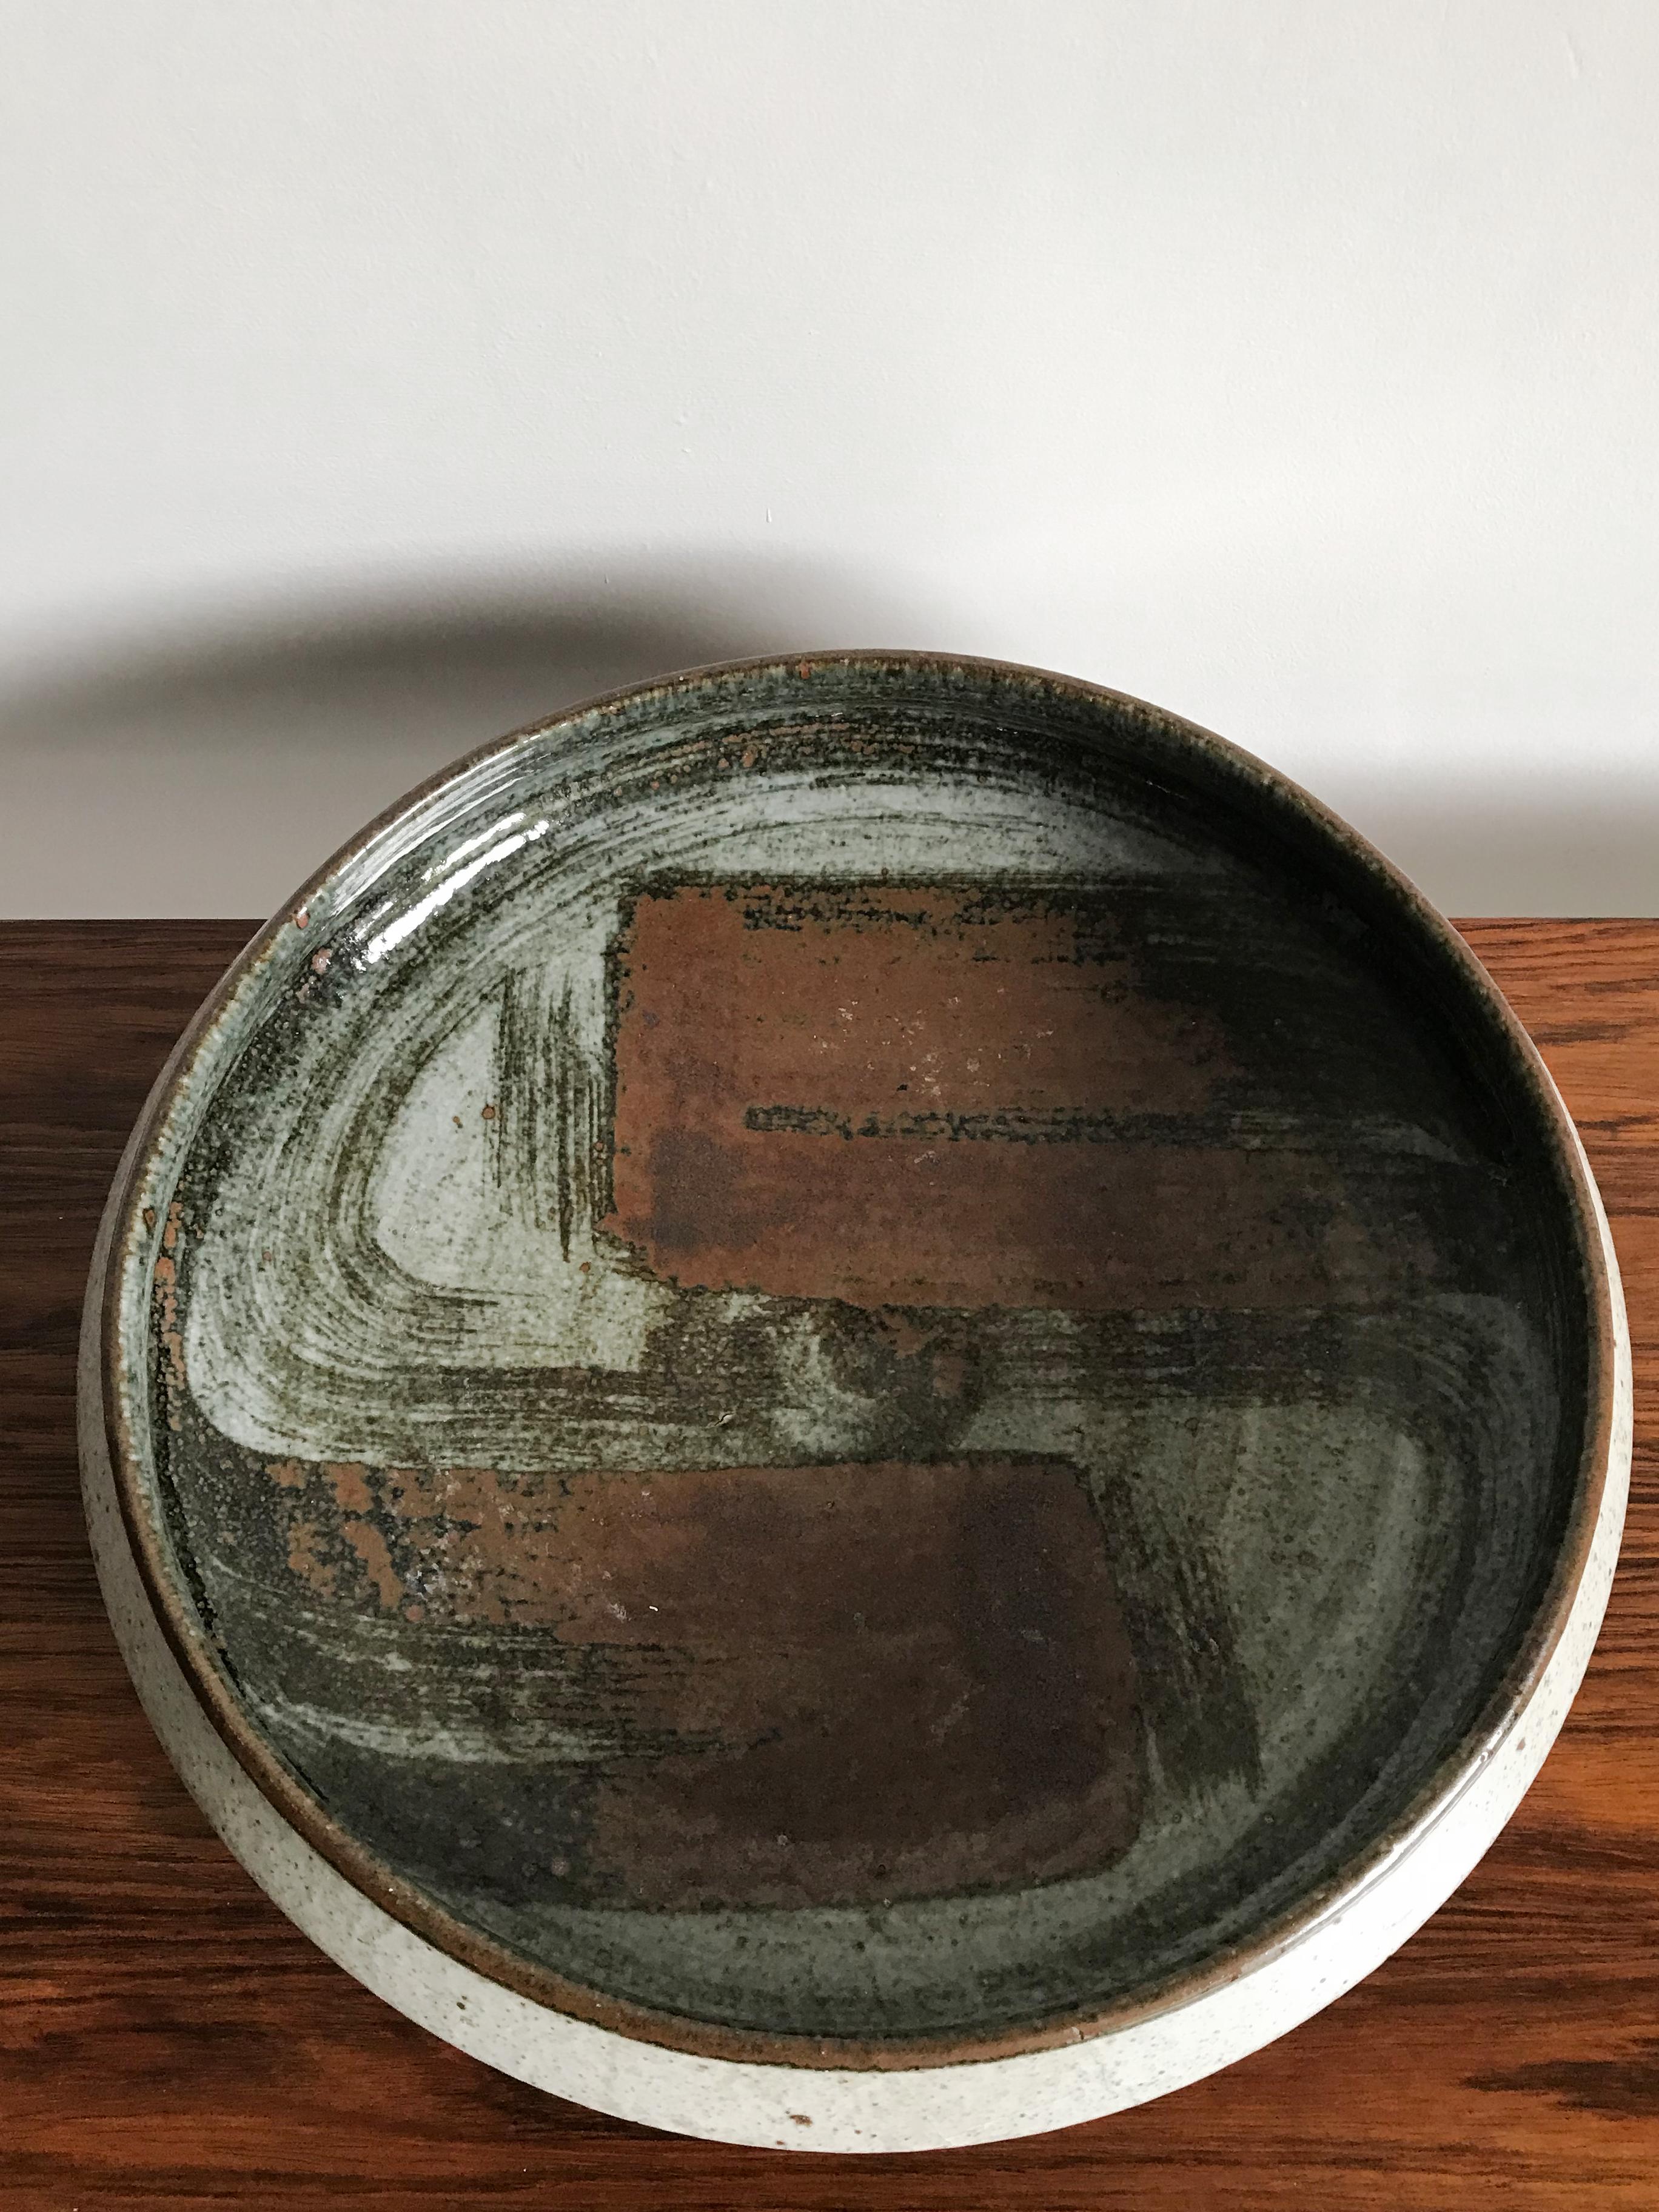 Large Rörstrand scandinavian bowl or centerpiece with mark engraved on the bottom, 1970s.